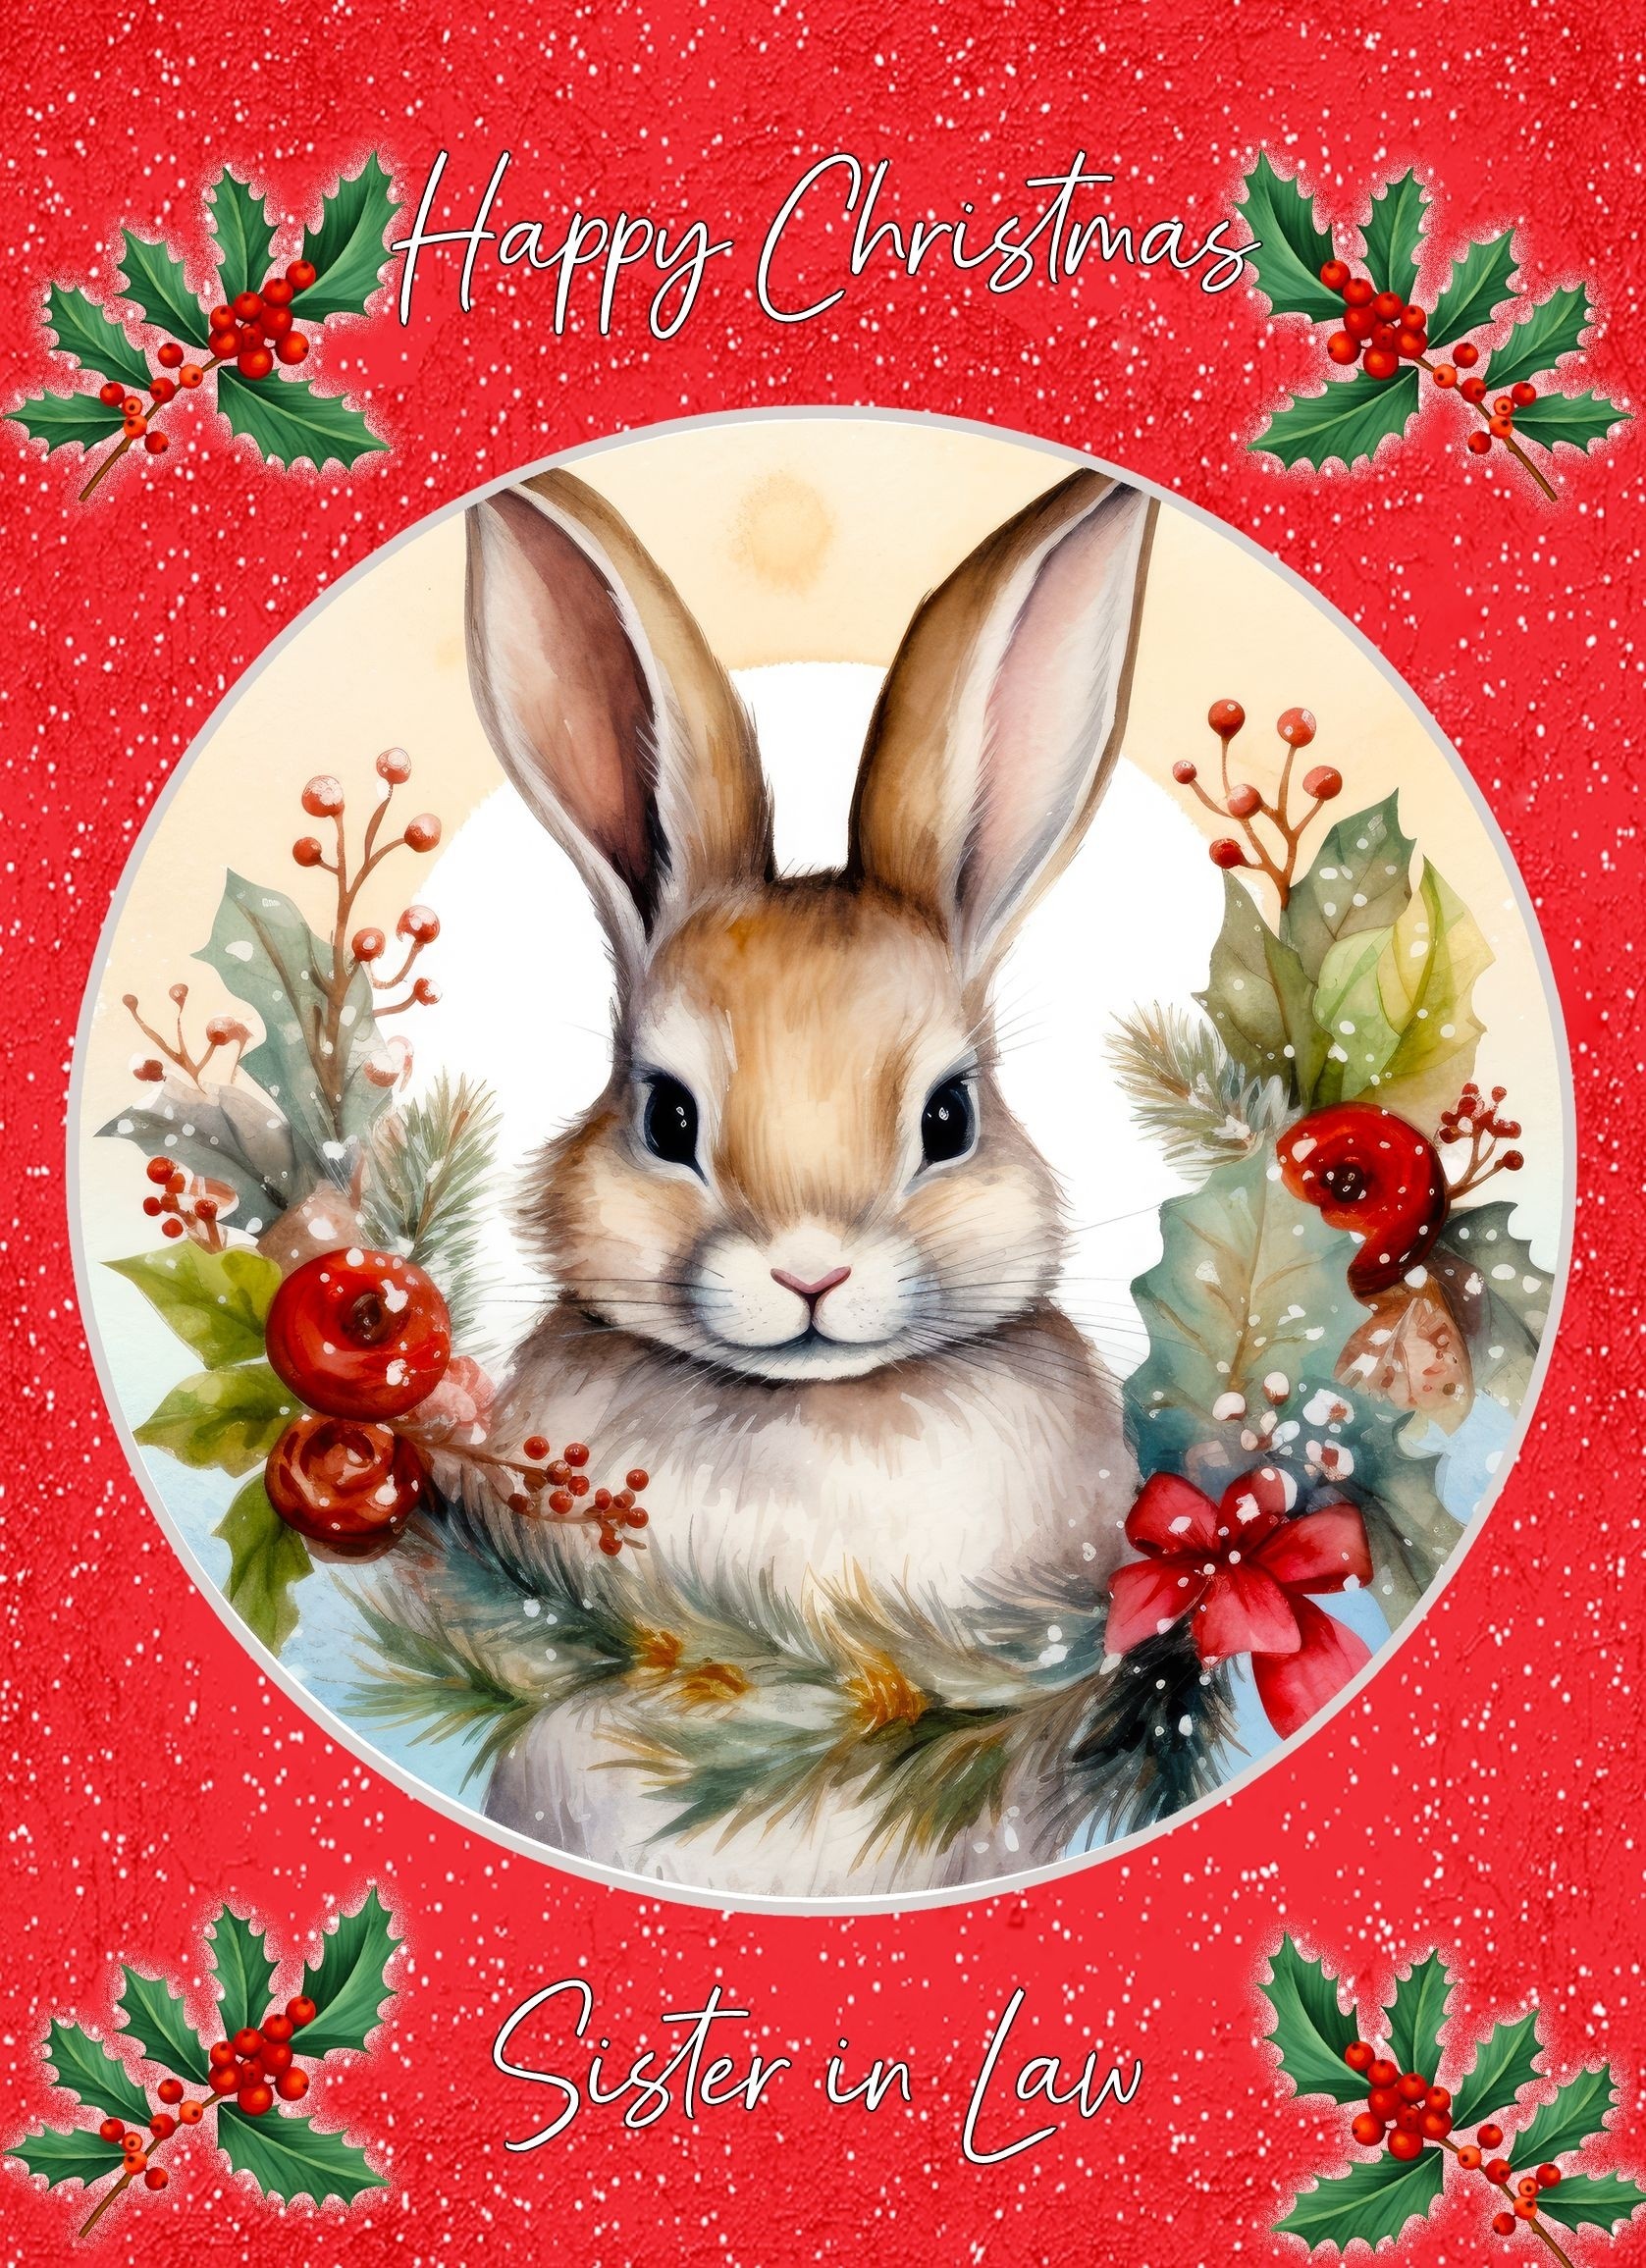 Christmas Card For Sister in Law (Globe, Rabbit)